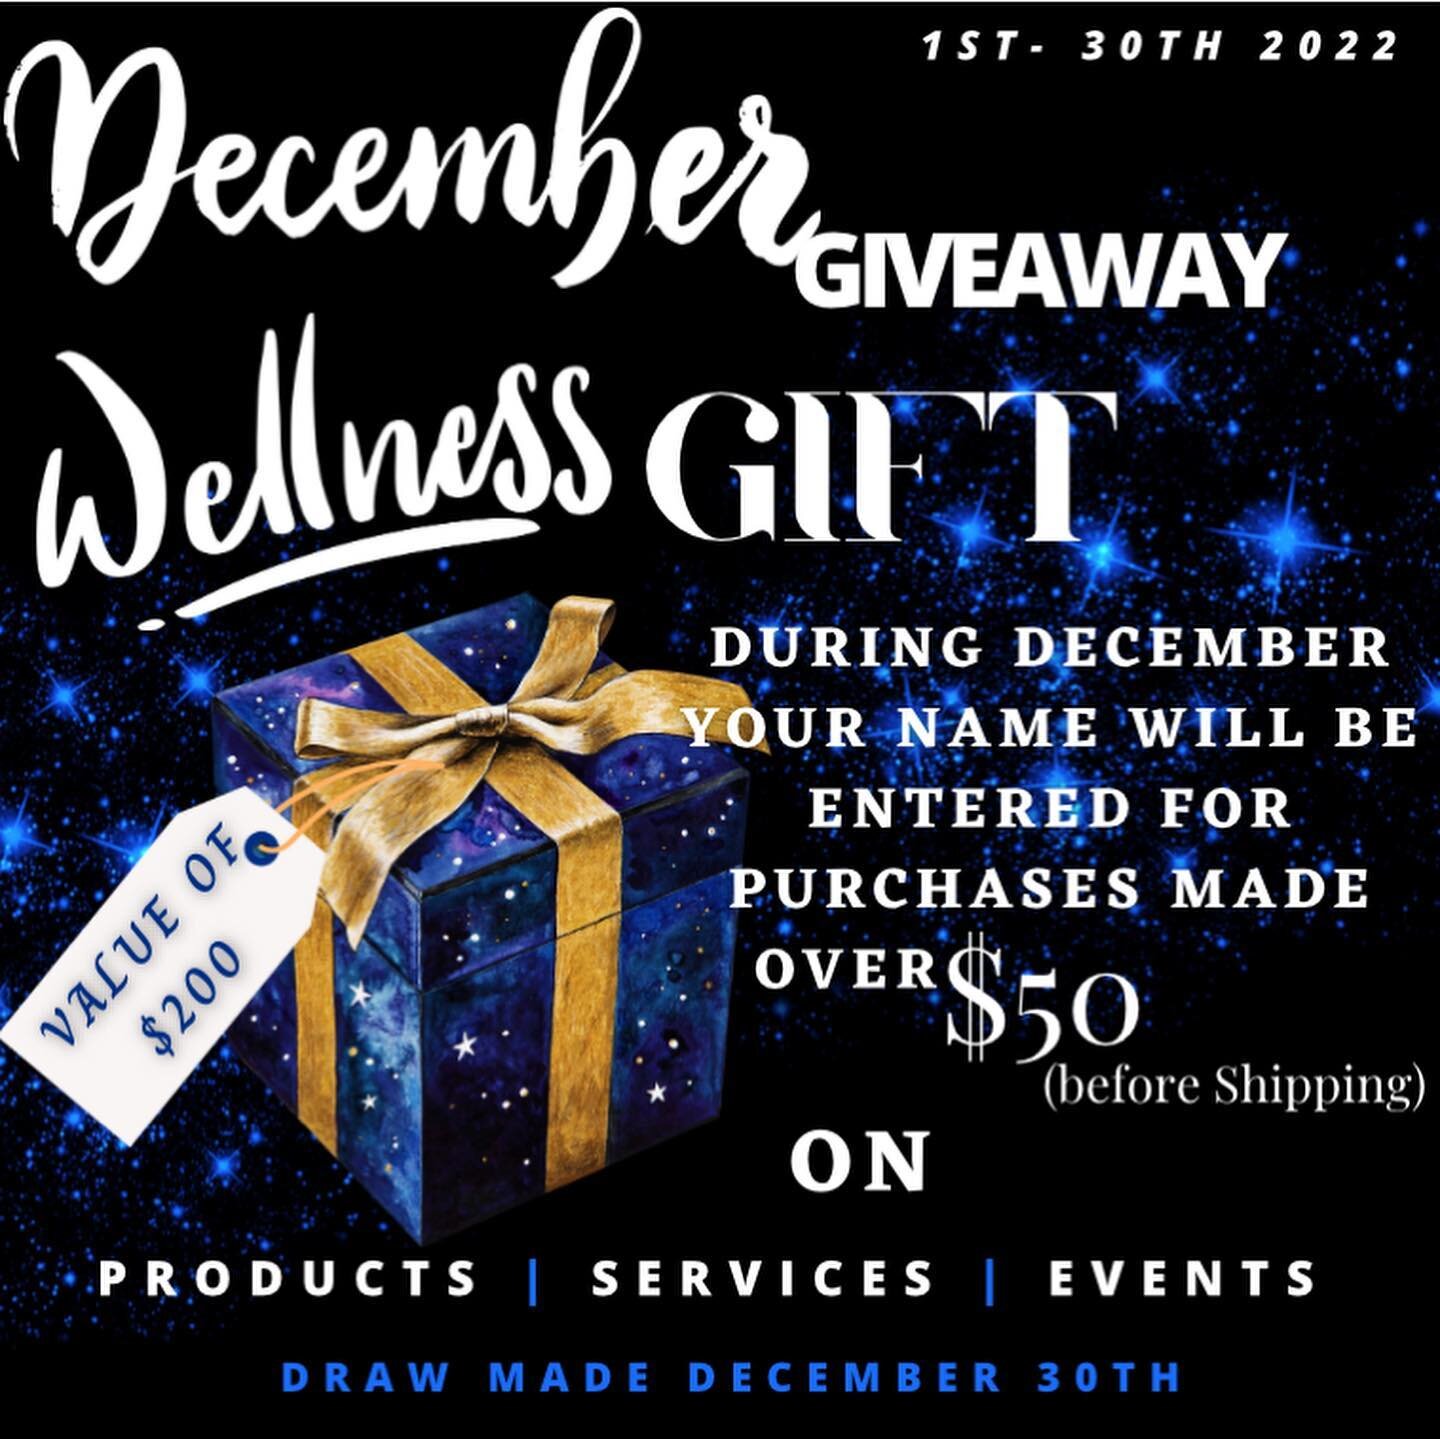 December Appreciation 
❄️
Wanting to share my appreciation for all the love and support. 
&bull;
During the month of December your name will be entered in a draw for a wellness gift package, for purchases made over
$50.00 (before shipping) on 
Produc